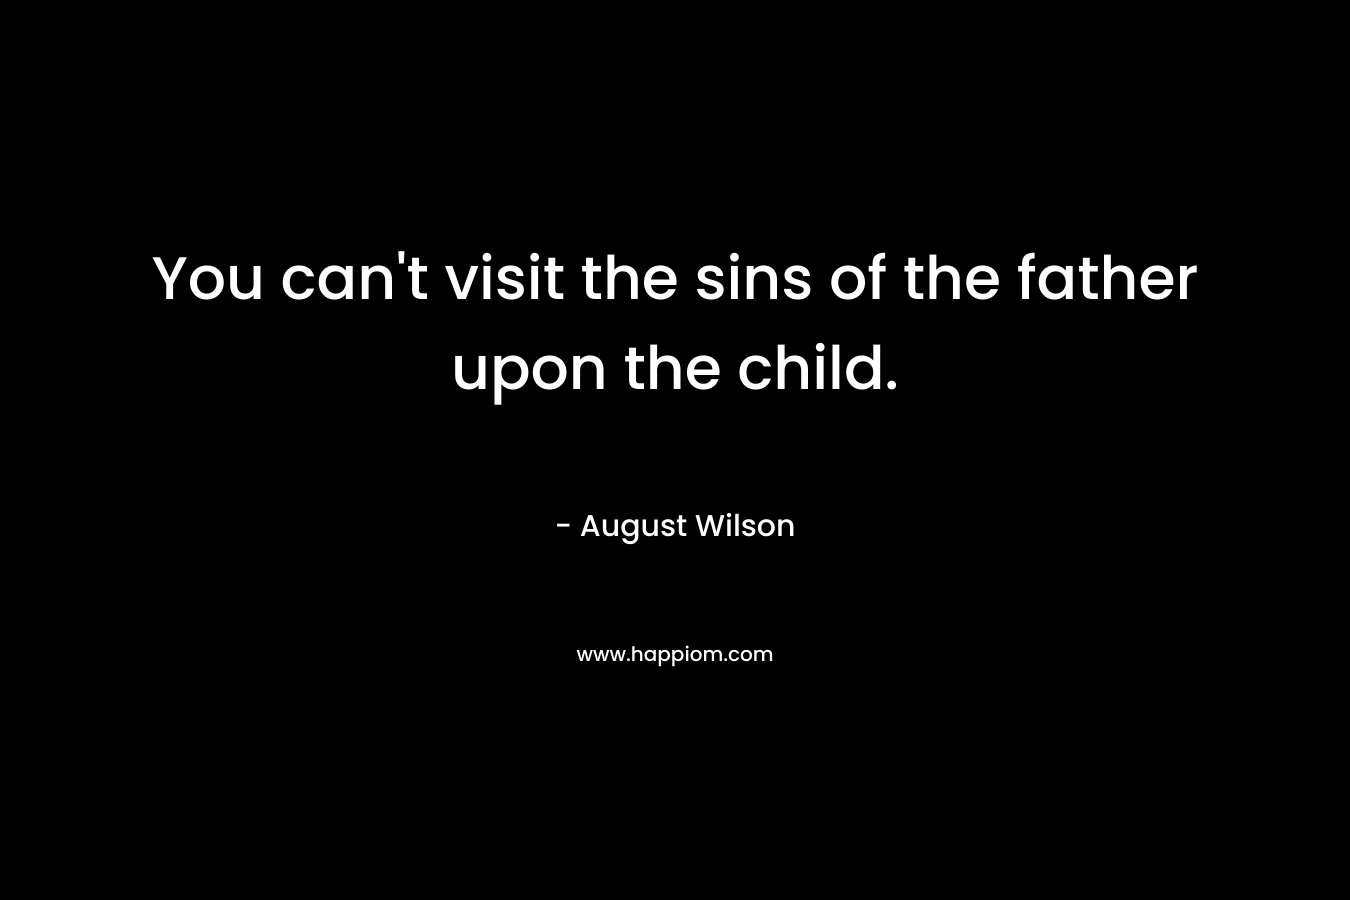 You can’t visit the sins of the father upon the child. – August Wilson